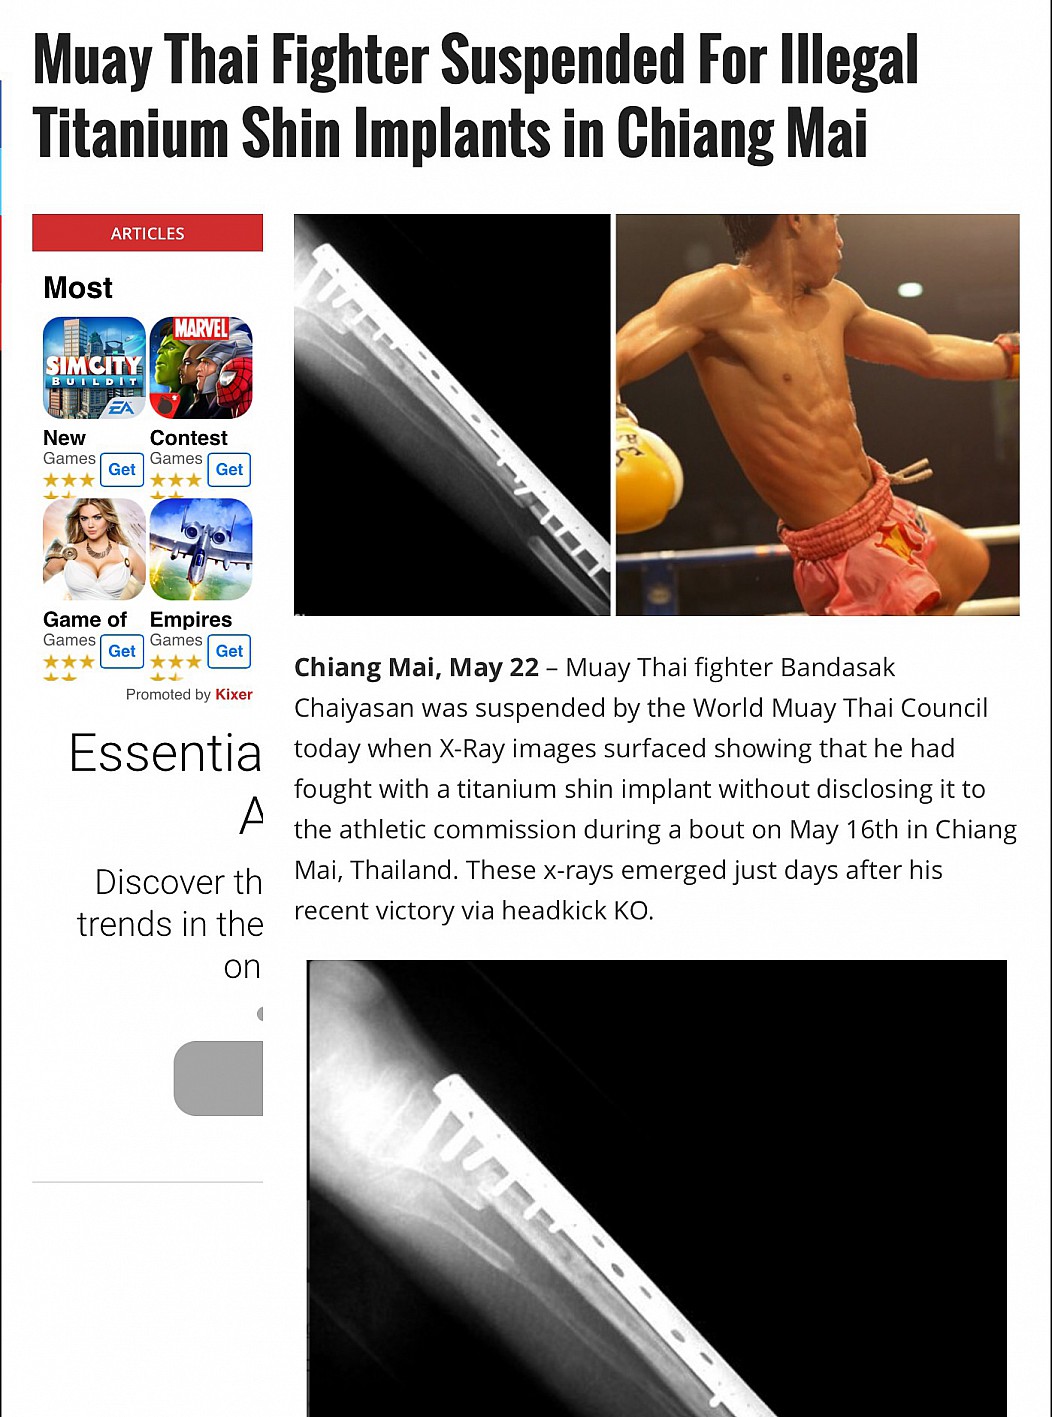 titanium shin implant - Muay Thai Fighter Suspended For Illegal Titanium Shin Implants in Chiang Mai Articles Most Marvel Simcity Buildit Sa New Games Contest Games Get Get Game of Empires Games Games Get Promoted by Kixer Essentia Chiang Mai, May 22 Muay